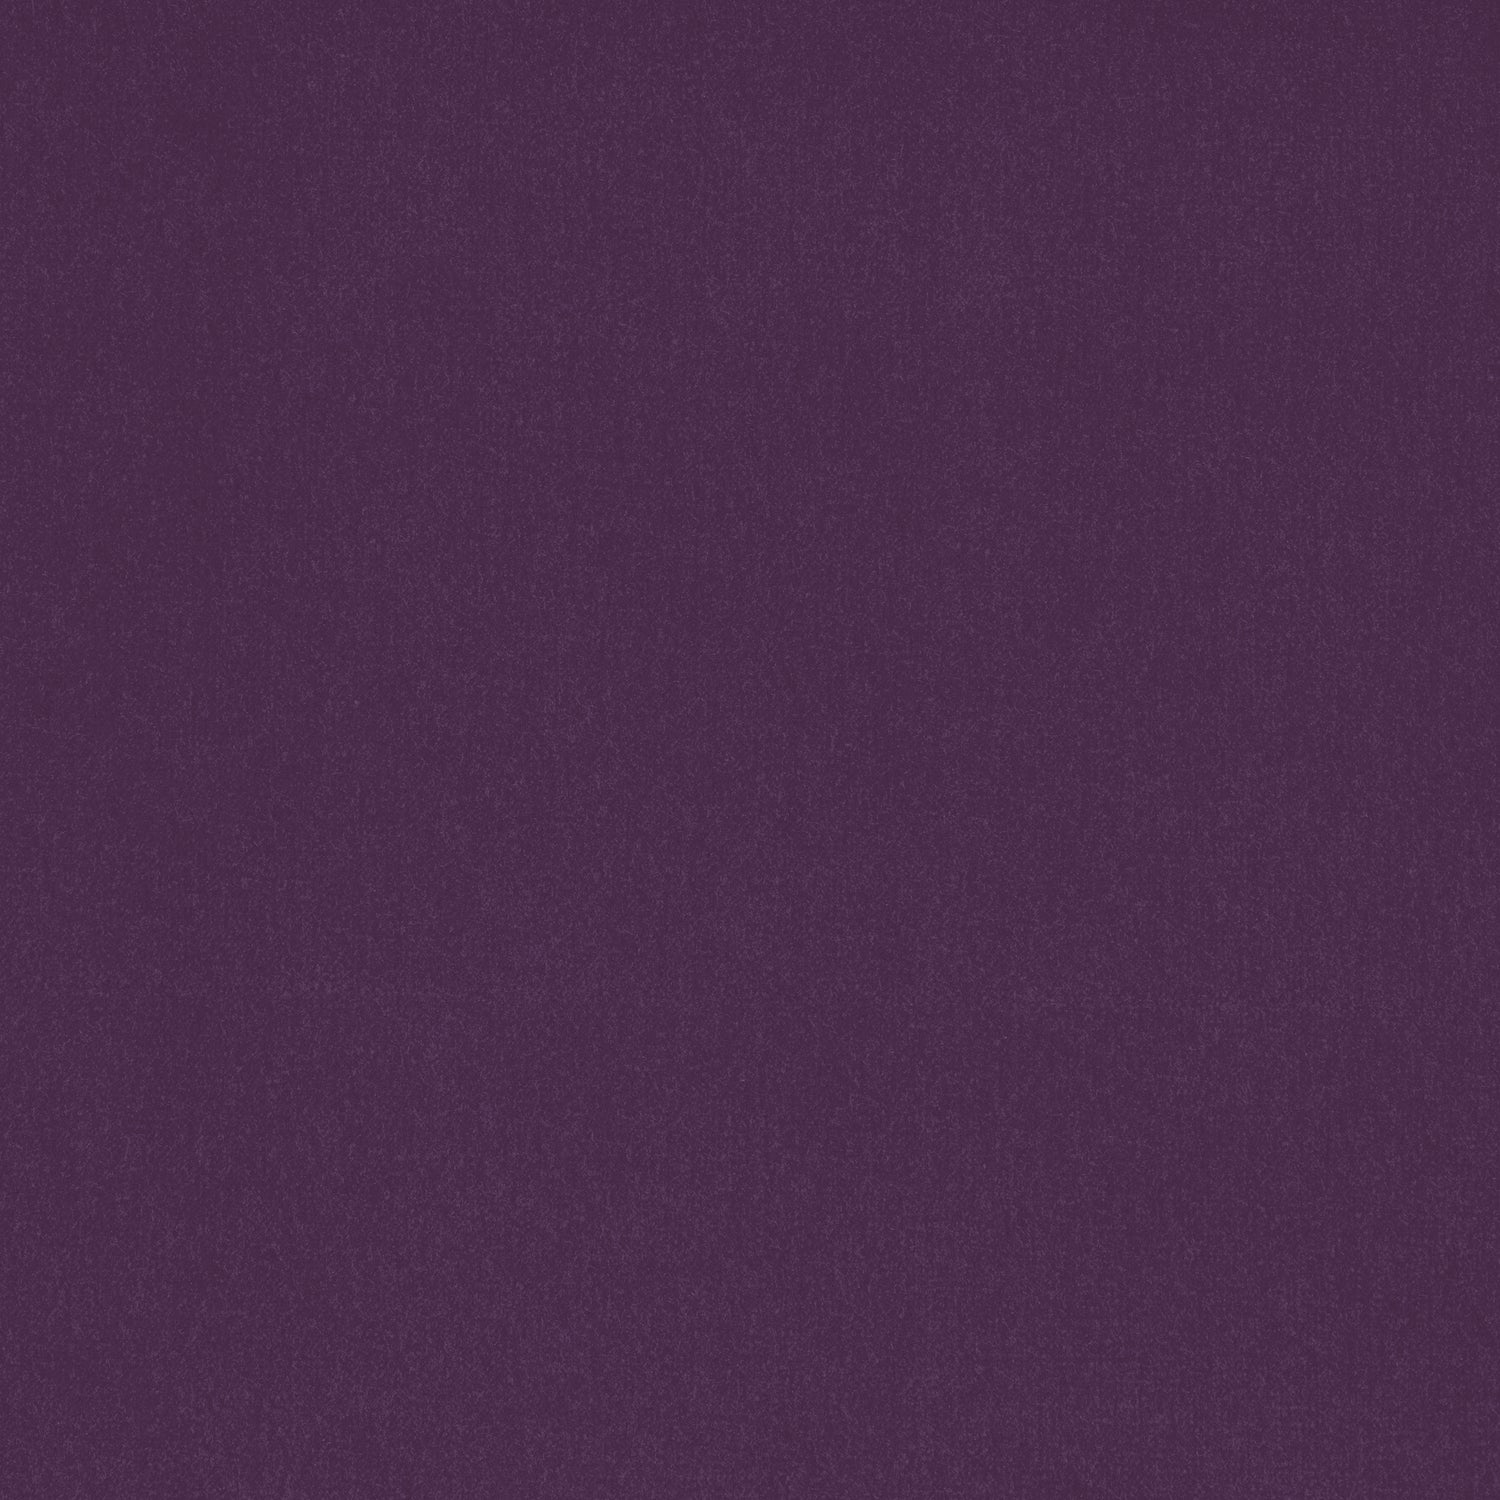 Alto Velvet fabric in amethyst color - pattern number W8931 - by Thibaut in the Lyra Velvets collection